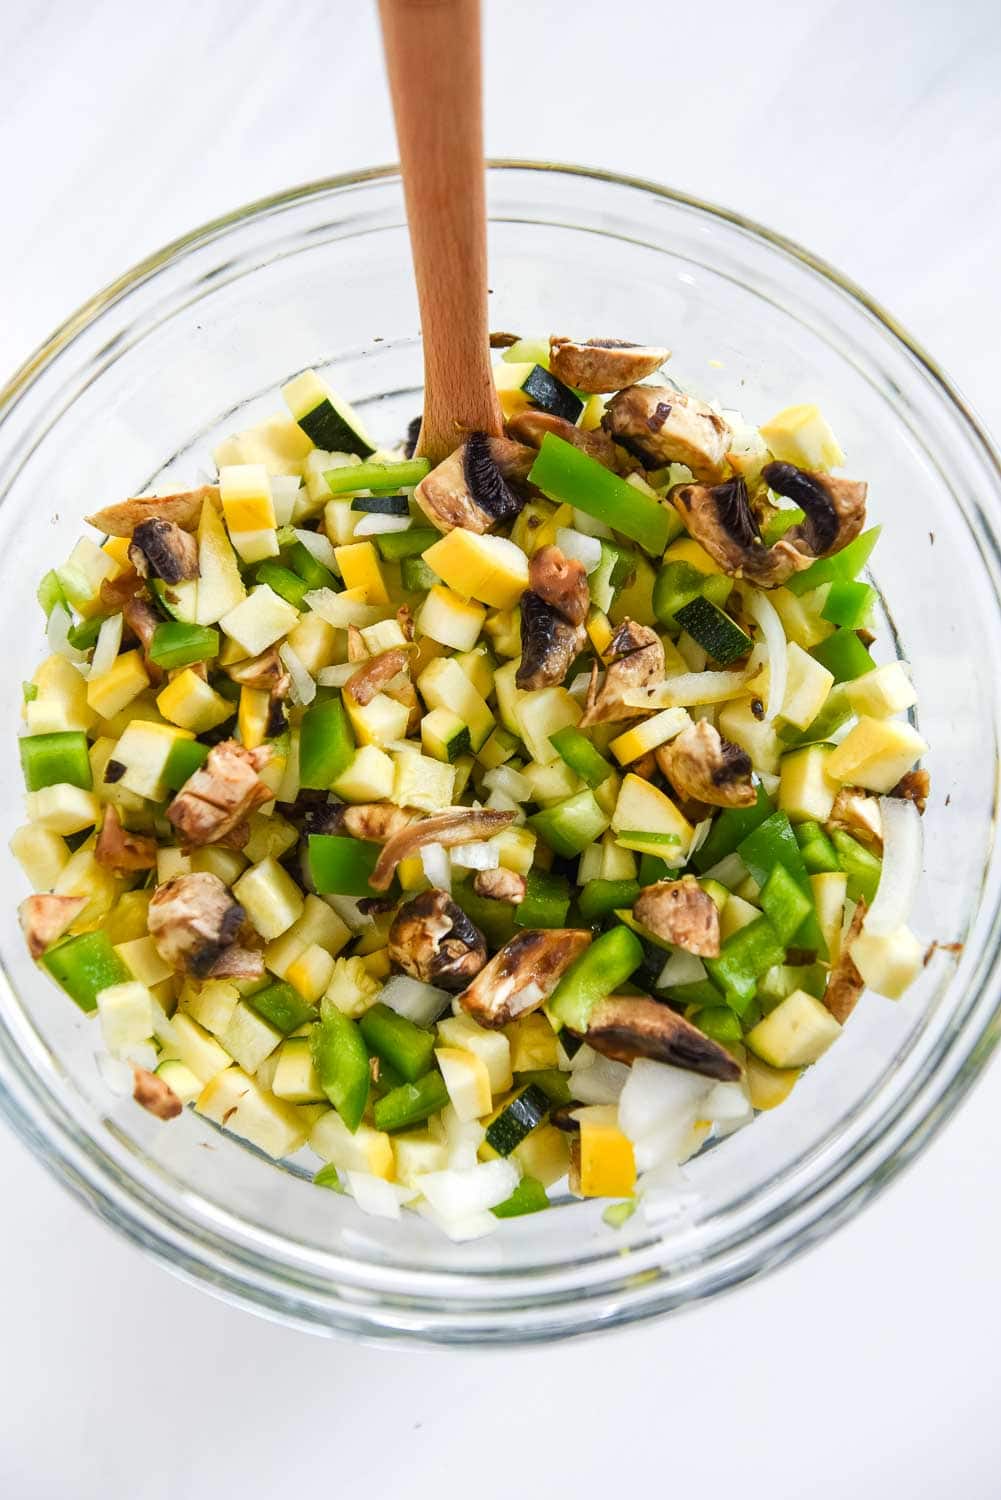 chopped squash, peppers and mushrooms in glass bowl